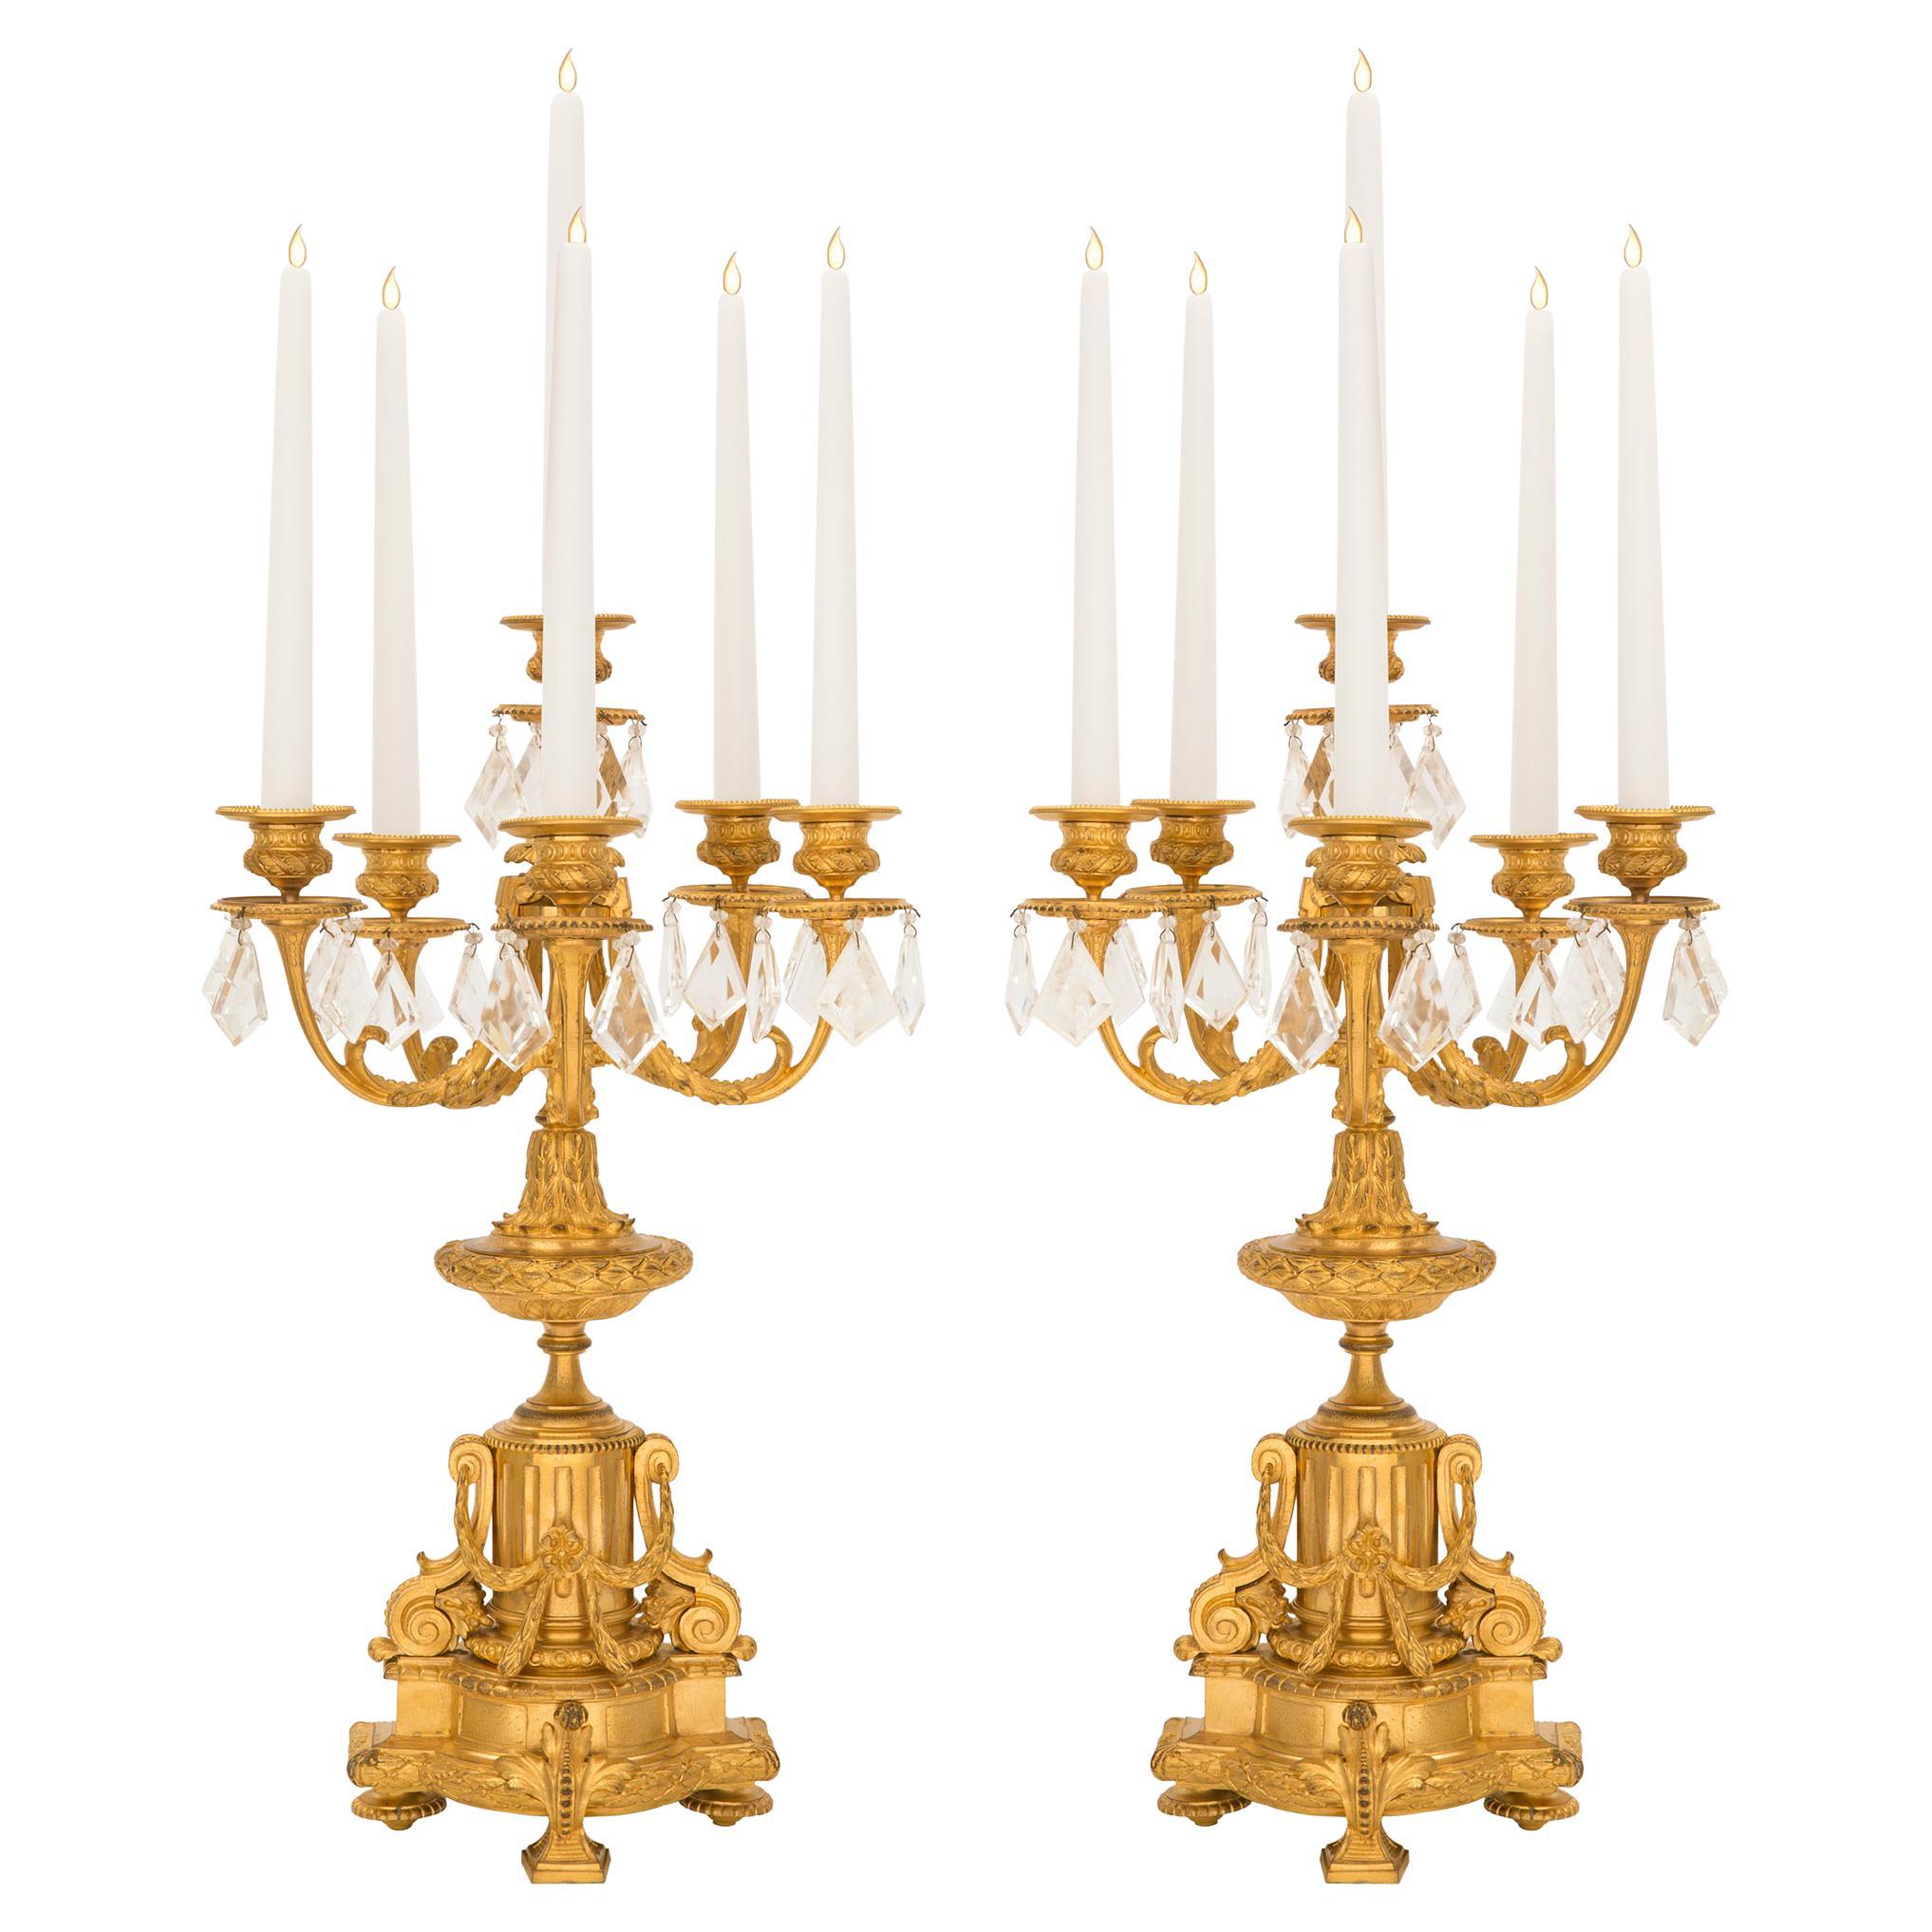 Pair of French Mid-19th Century Louis XVI Style Five Arm Candelabras For Sale